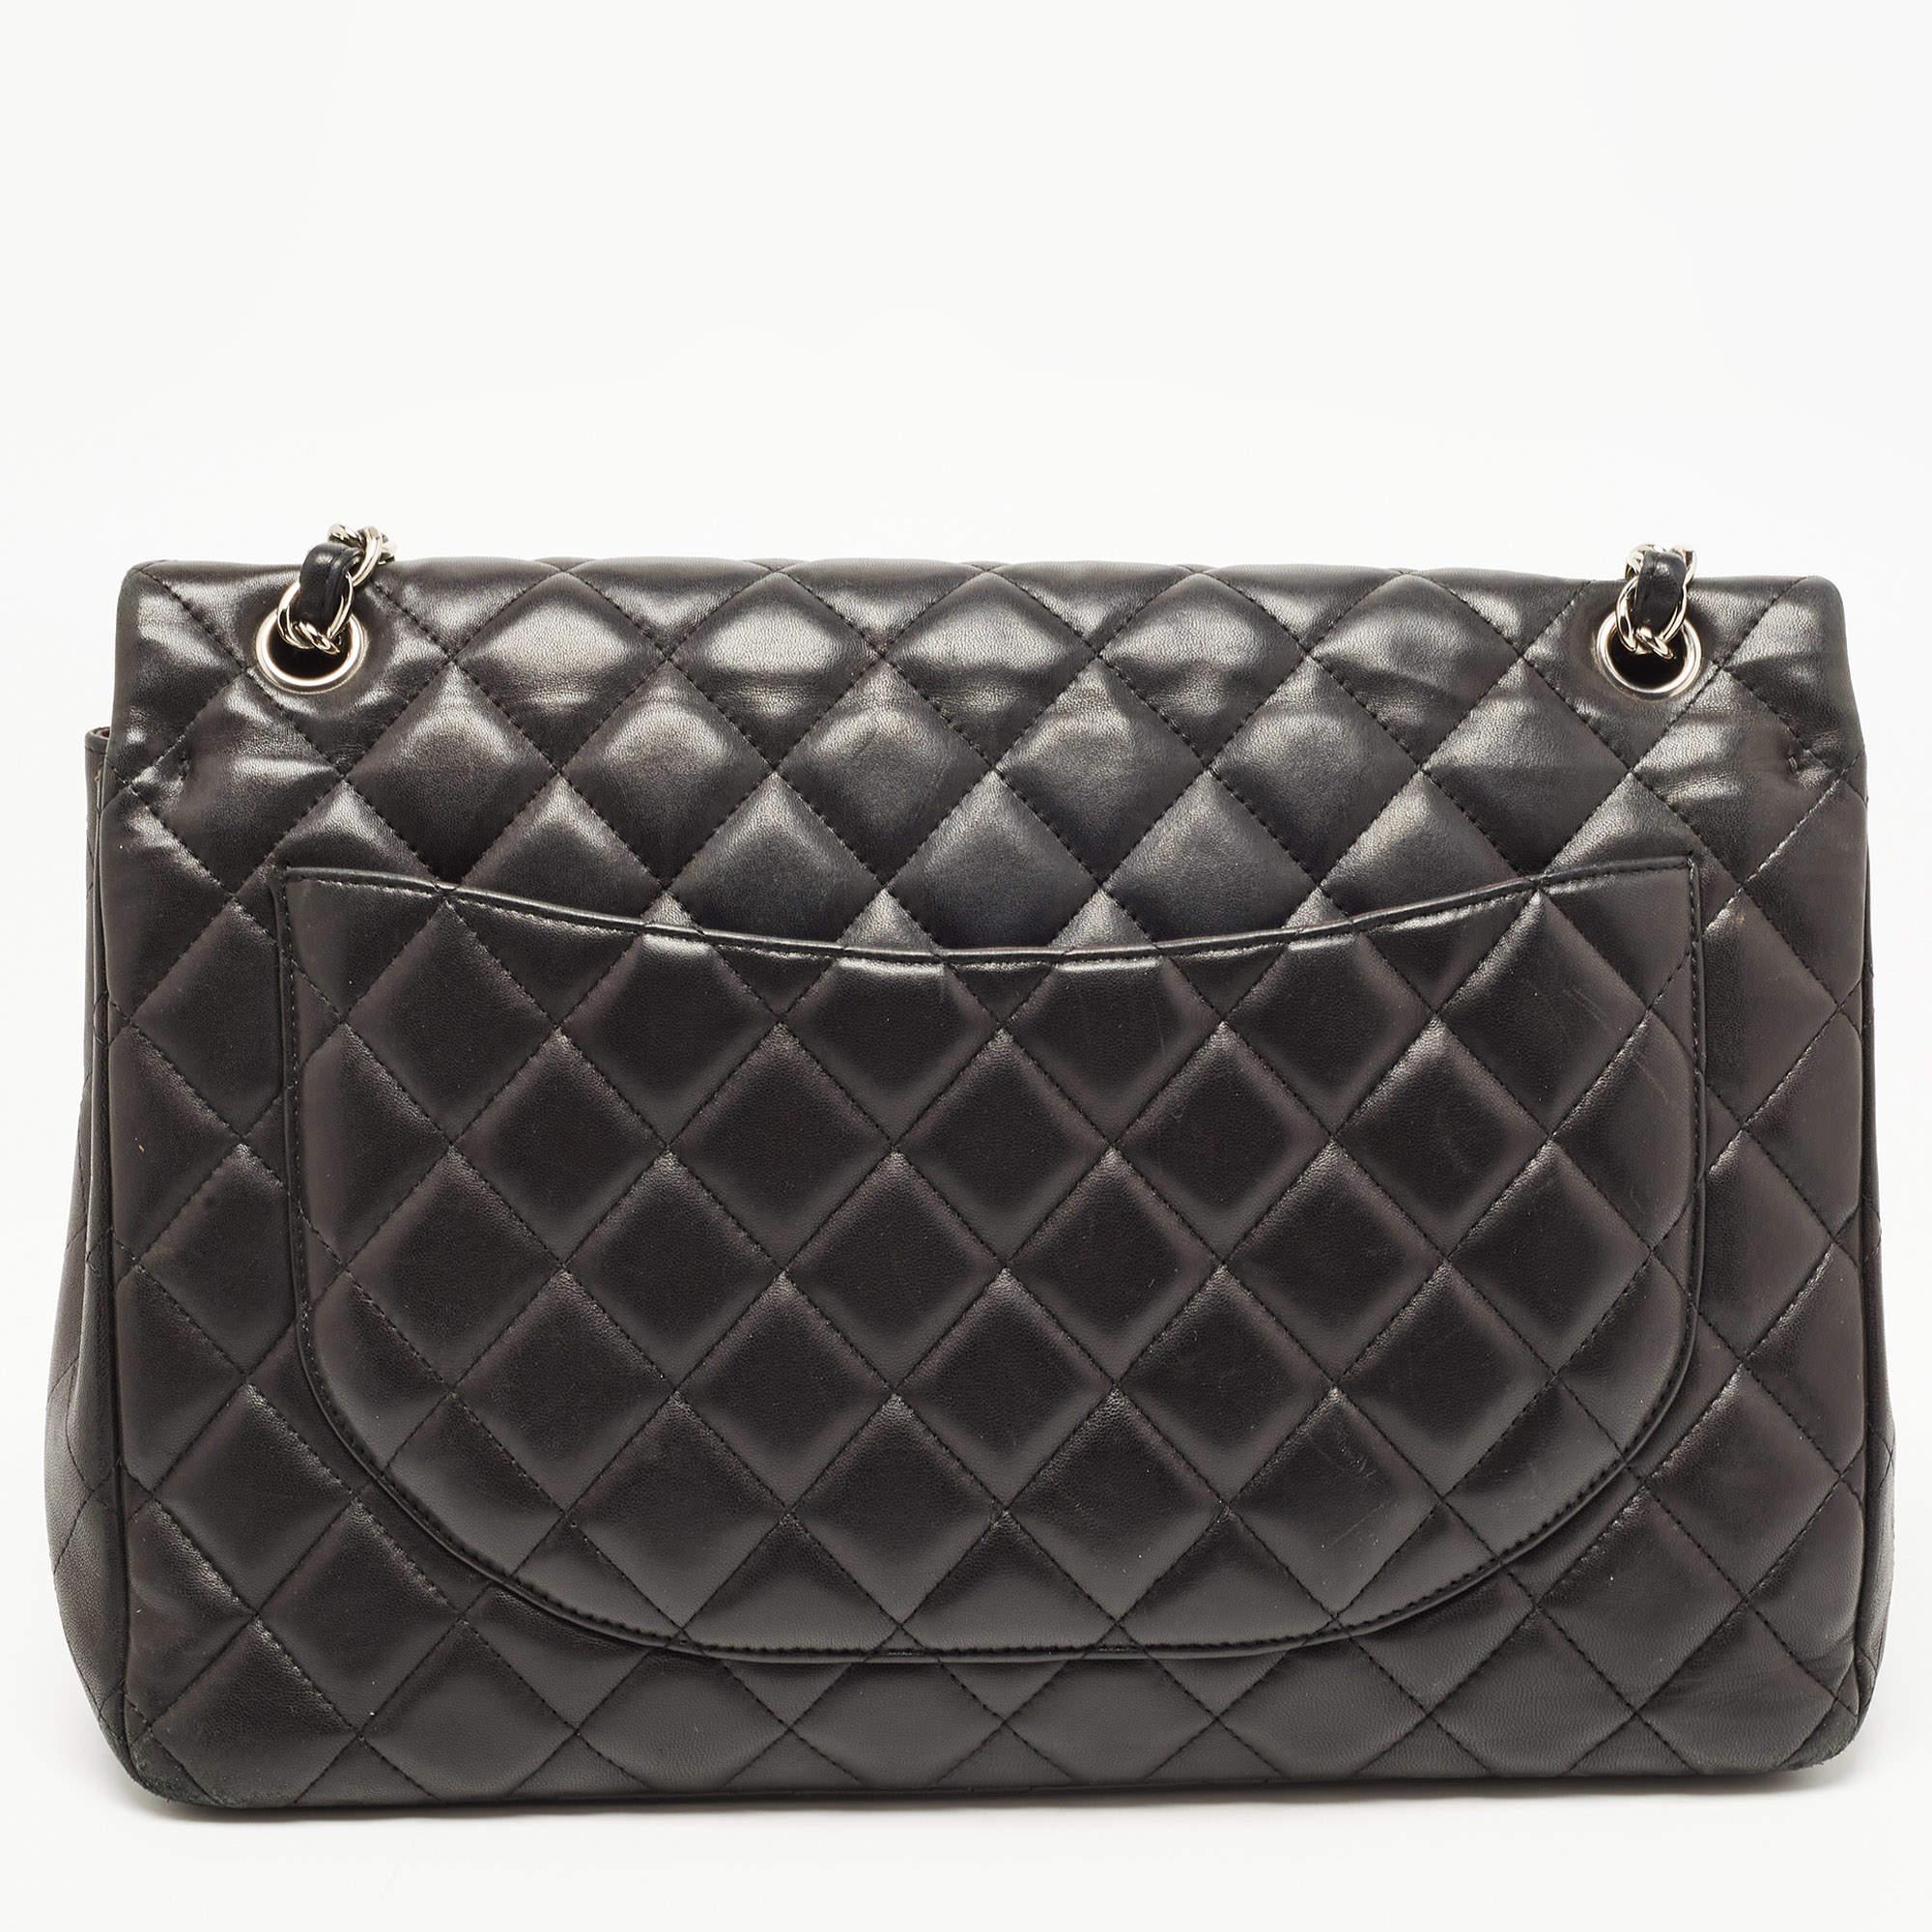 Chanel Black Quilted Leather Maxi Classic Double Flap Bag For Sale 4